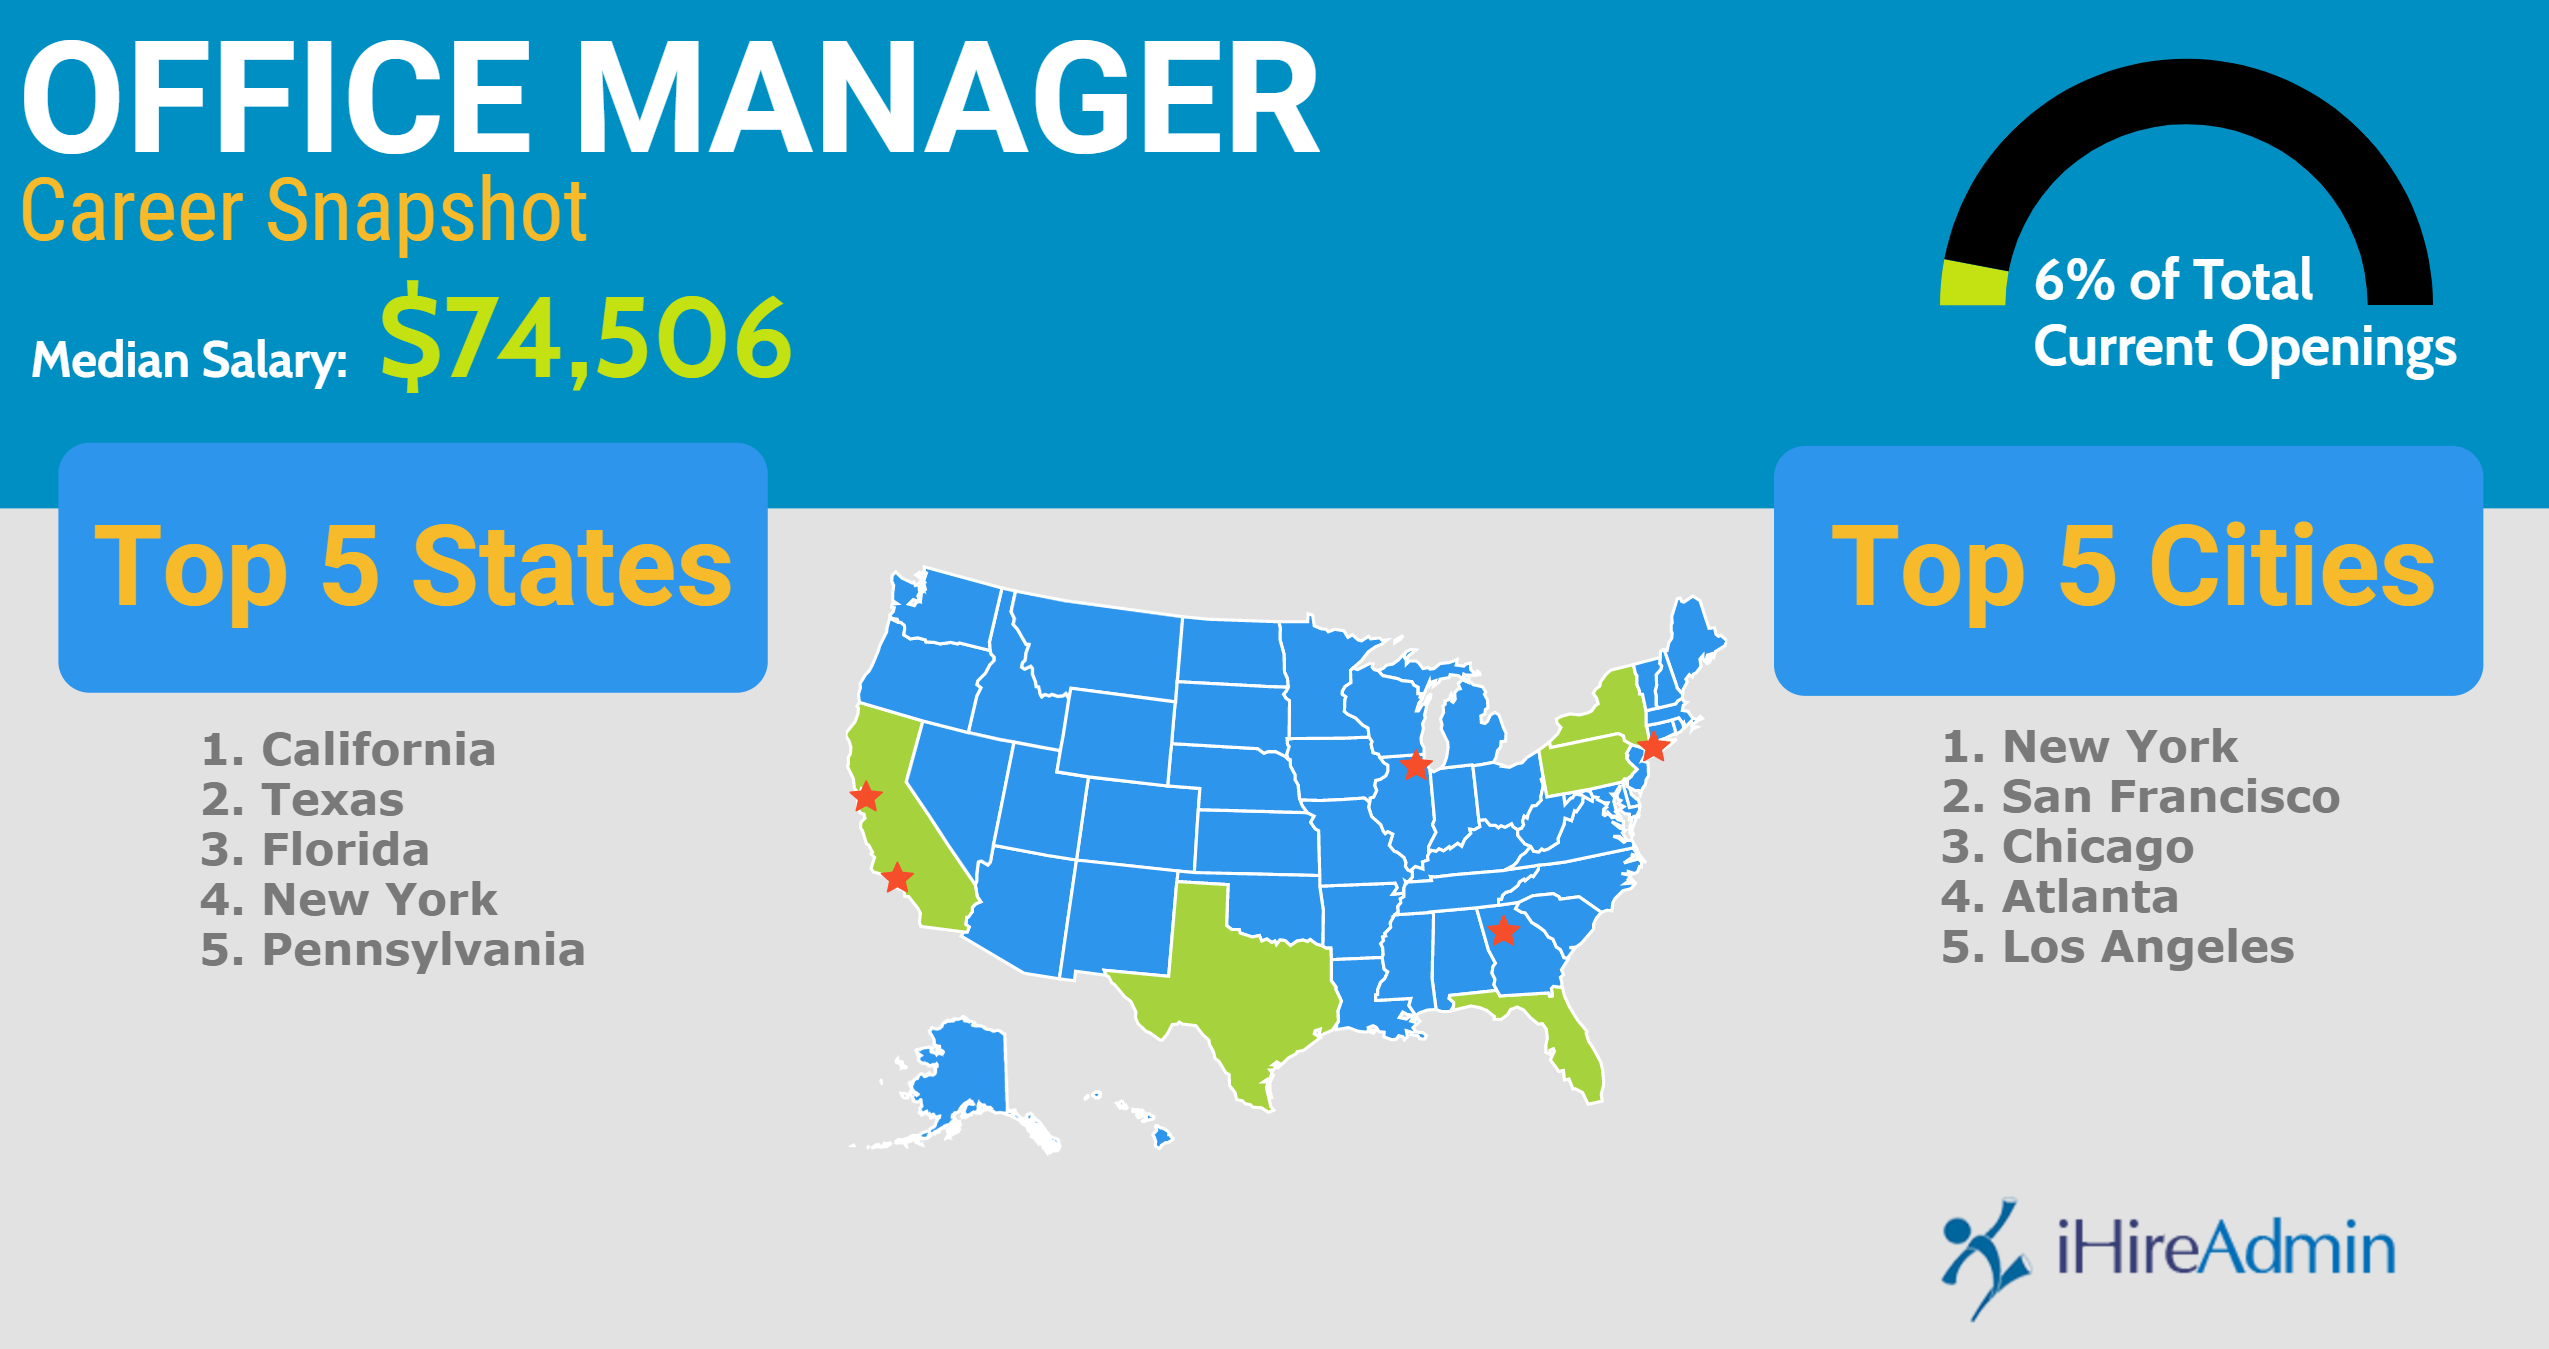 Office manager career snapshot infographic